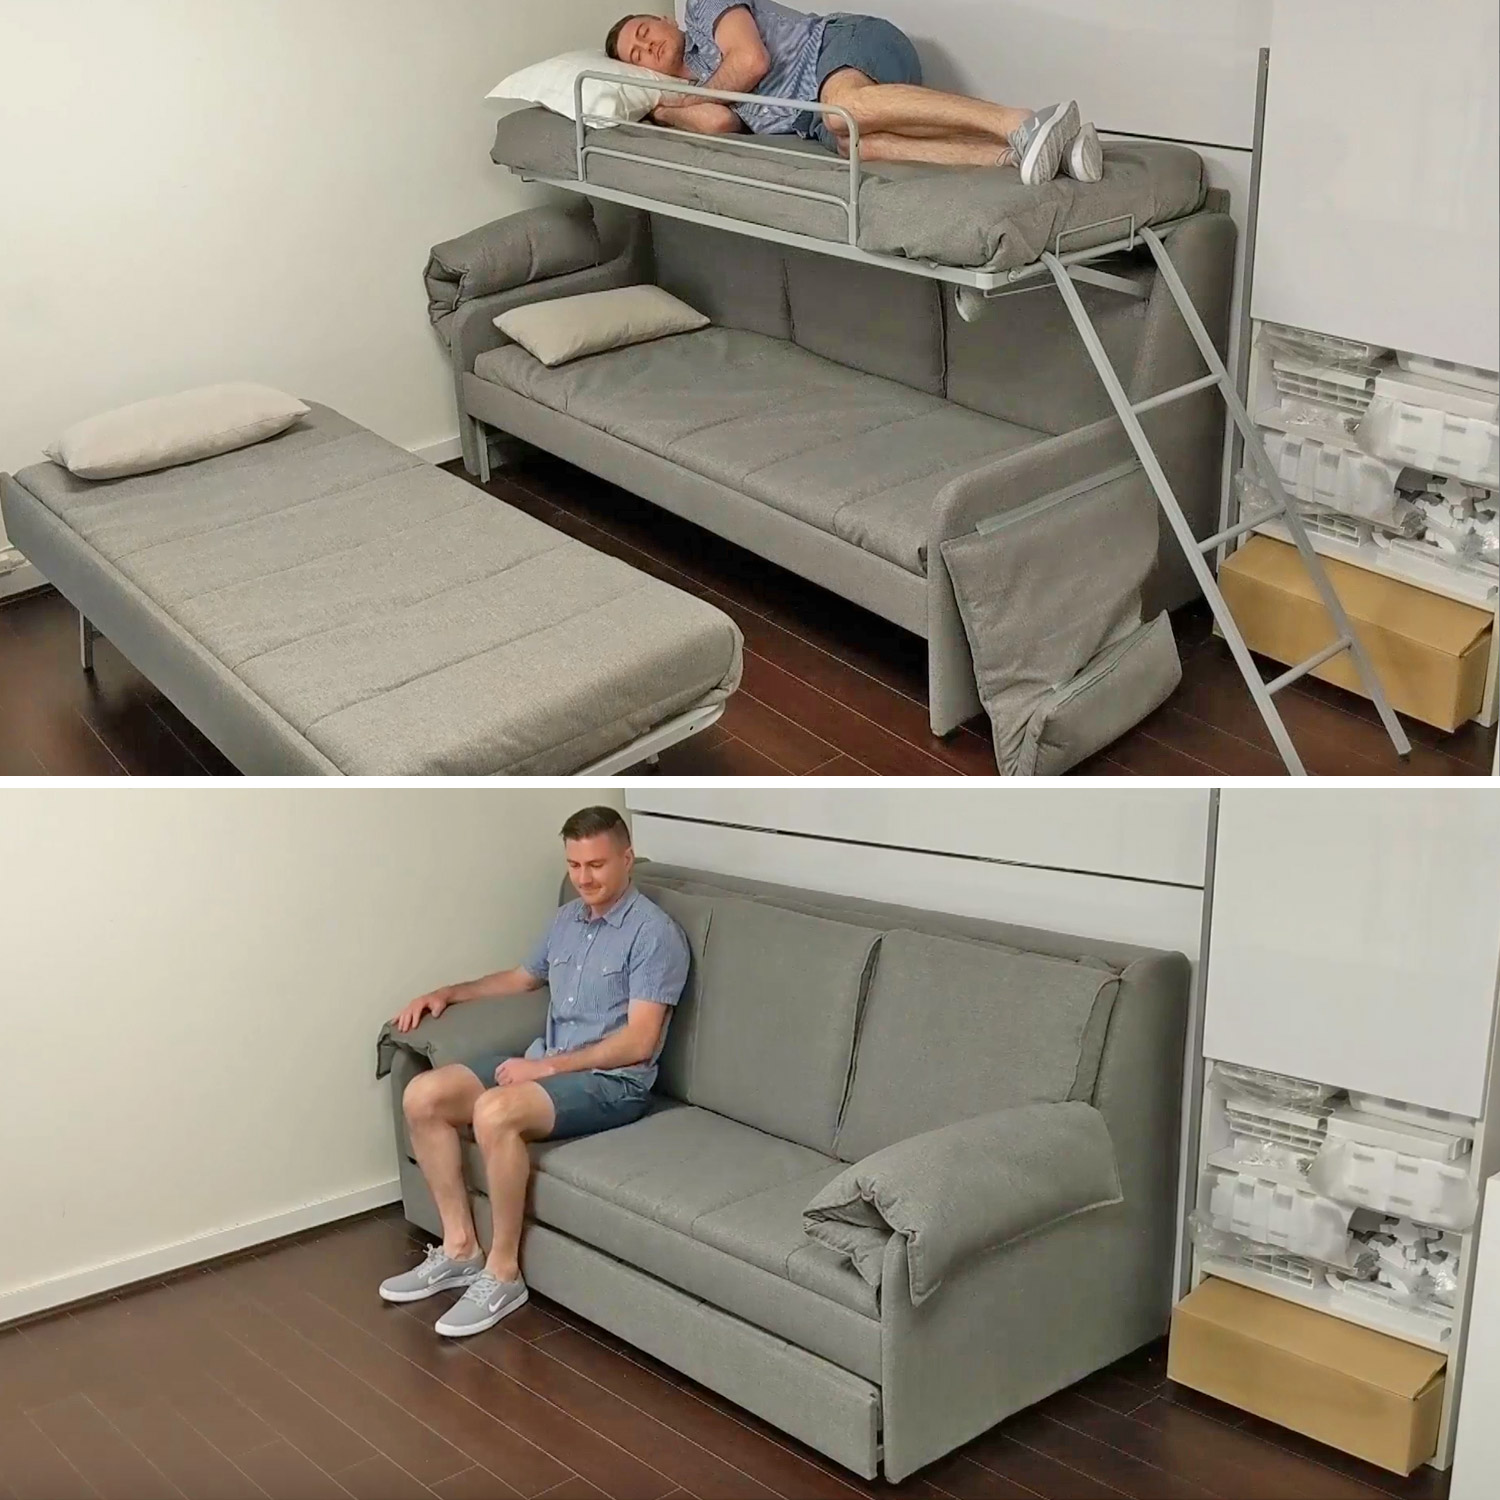 This Transforming Bunk Bed Sleeps 3 And, Couch Converts To Bunk Bed